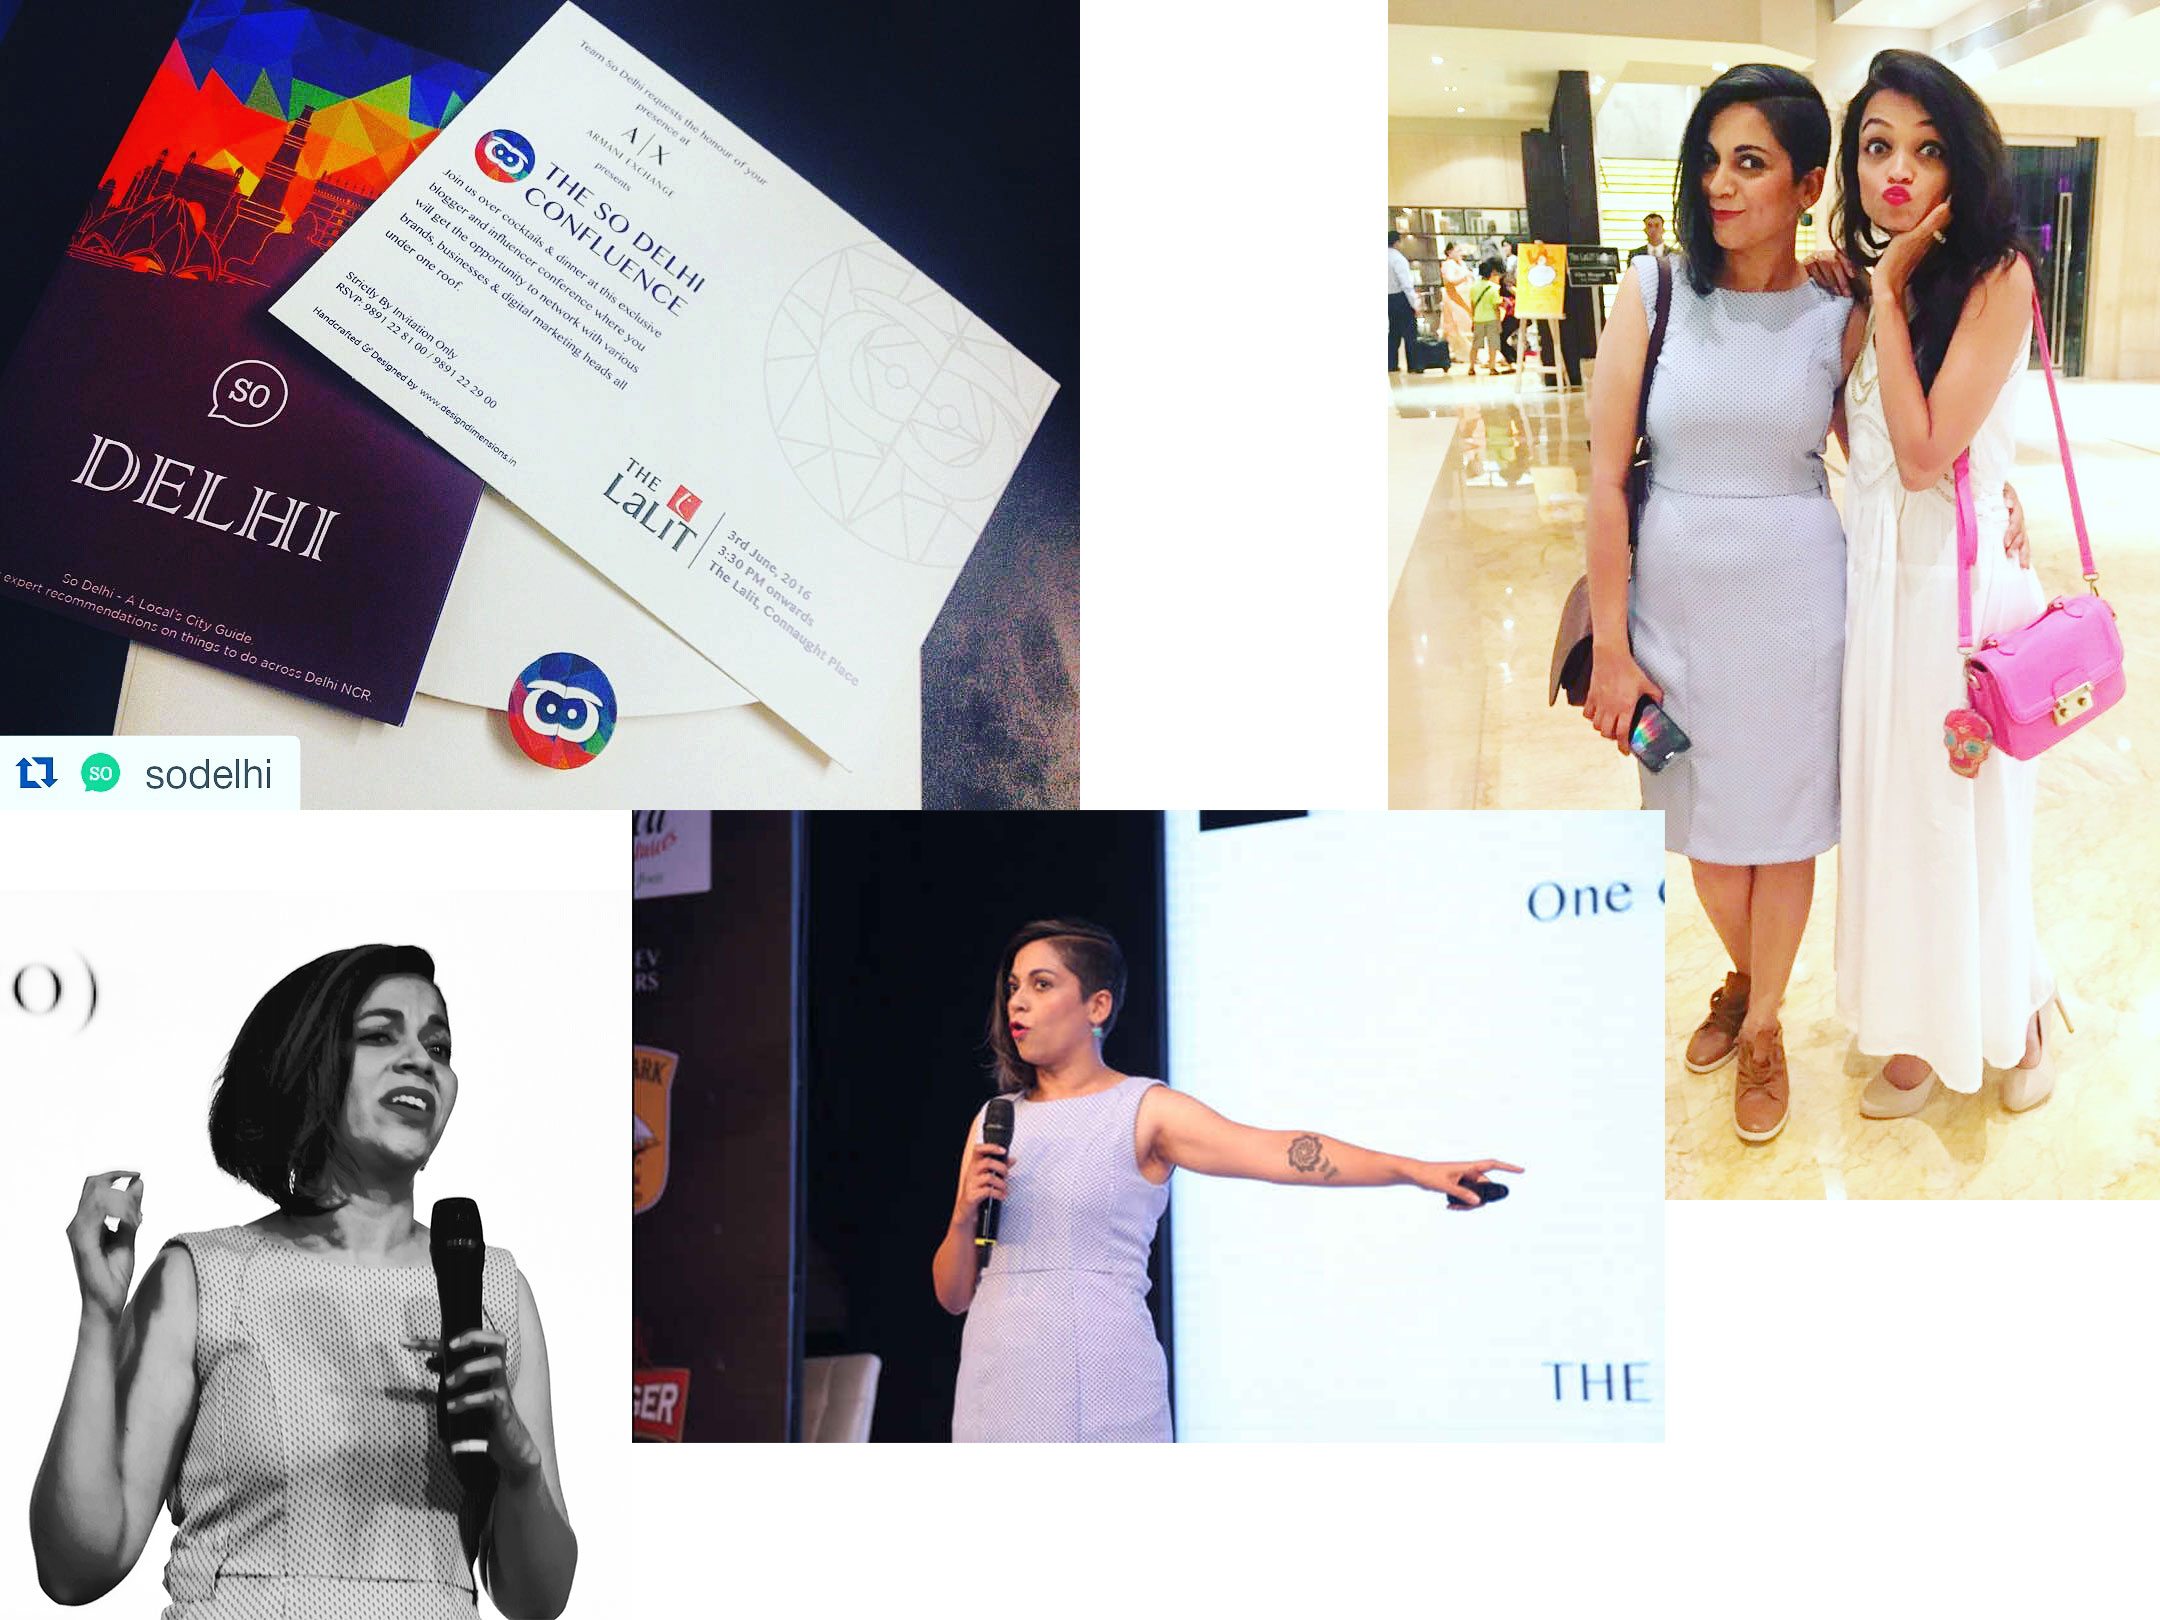 Naina.co, SoDelhi, Confluence At The Lalit, #ConfluenceAtTheLalit, Blogging Conference, Influencers Conference, Keynote Speaker, Luxury Photographer, Luxury Blogger, Lifestyle Photographer, Lifestyle Blogger, Naina Redhu, The Business of Blogging